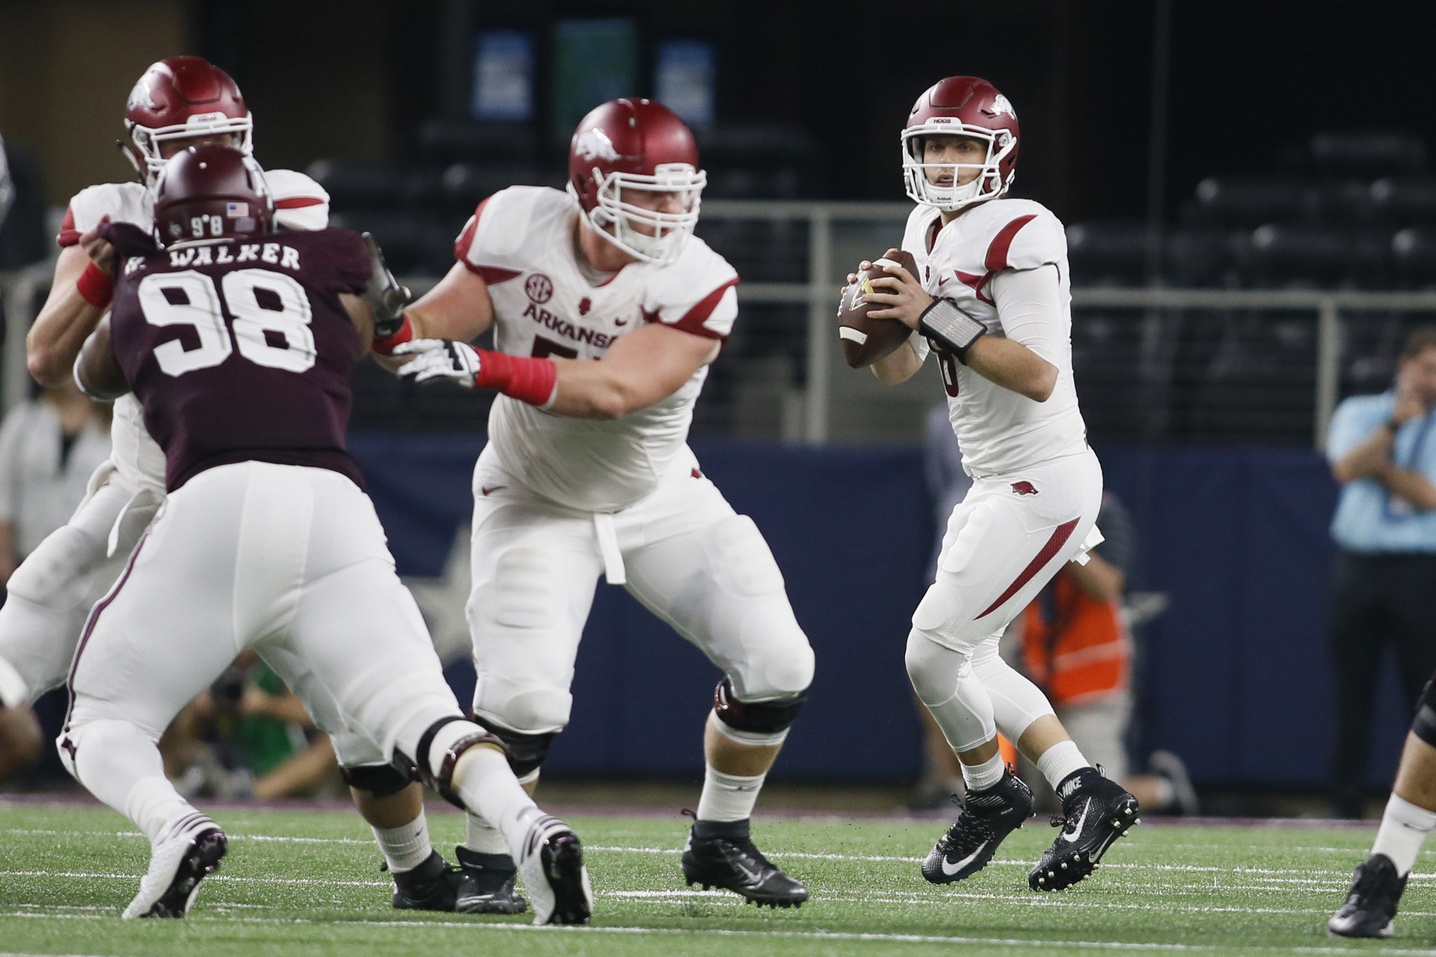 Sep 24, 2016; Dallas, TX, USA; Arkansas Razorbacks quarterback Austin Allen (8) stands in the pocket to pass in the first quarter against the Texas A&M Aggies at AT&T Stadium. Mandatory Credit: Tim Heitman-USA TODAY Sports